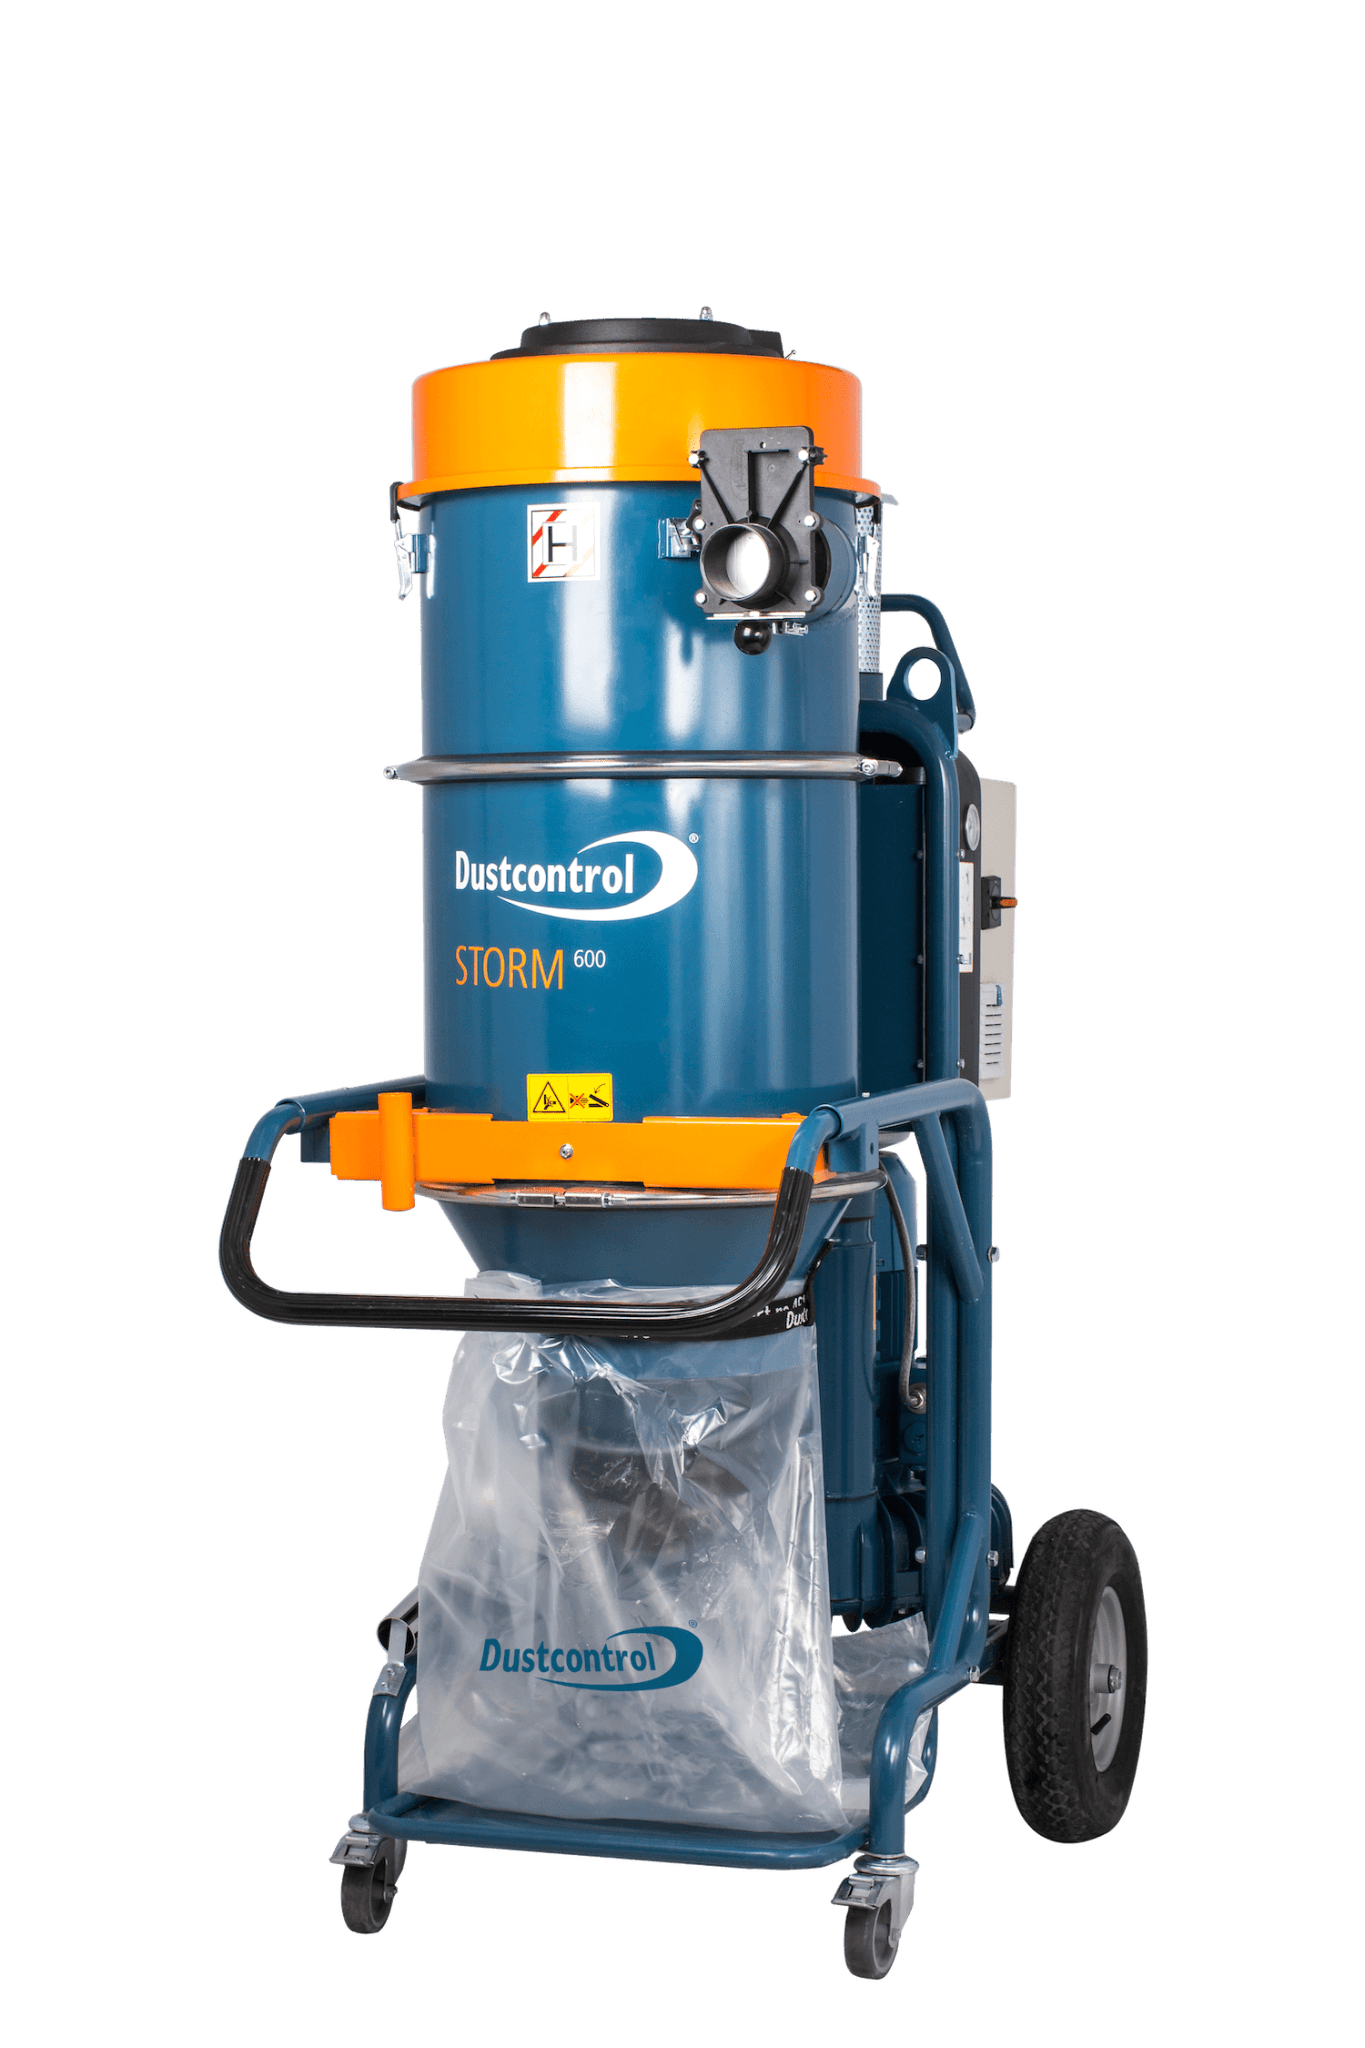 STORM 600L DUST COLLECTOR - Xtreme Polishing Systems: dust collectors, concrete dust extractors, concrete grinding vacuums.